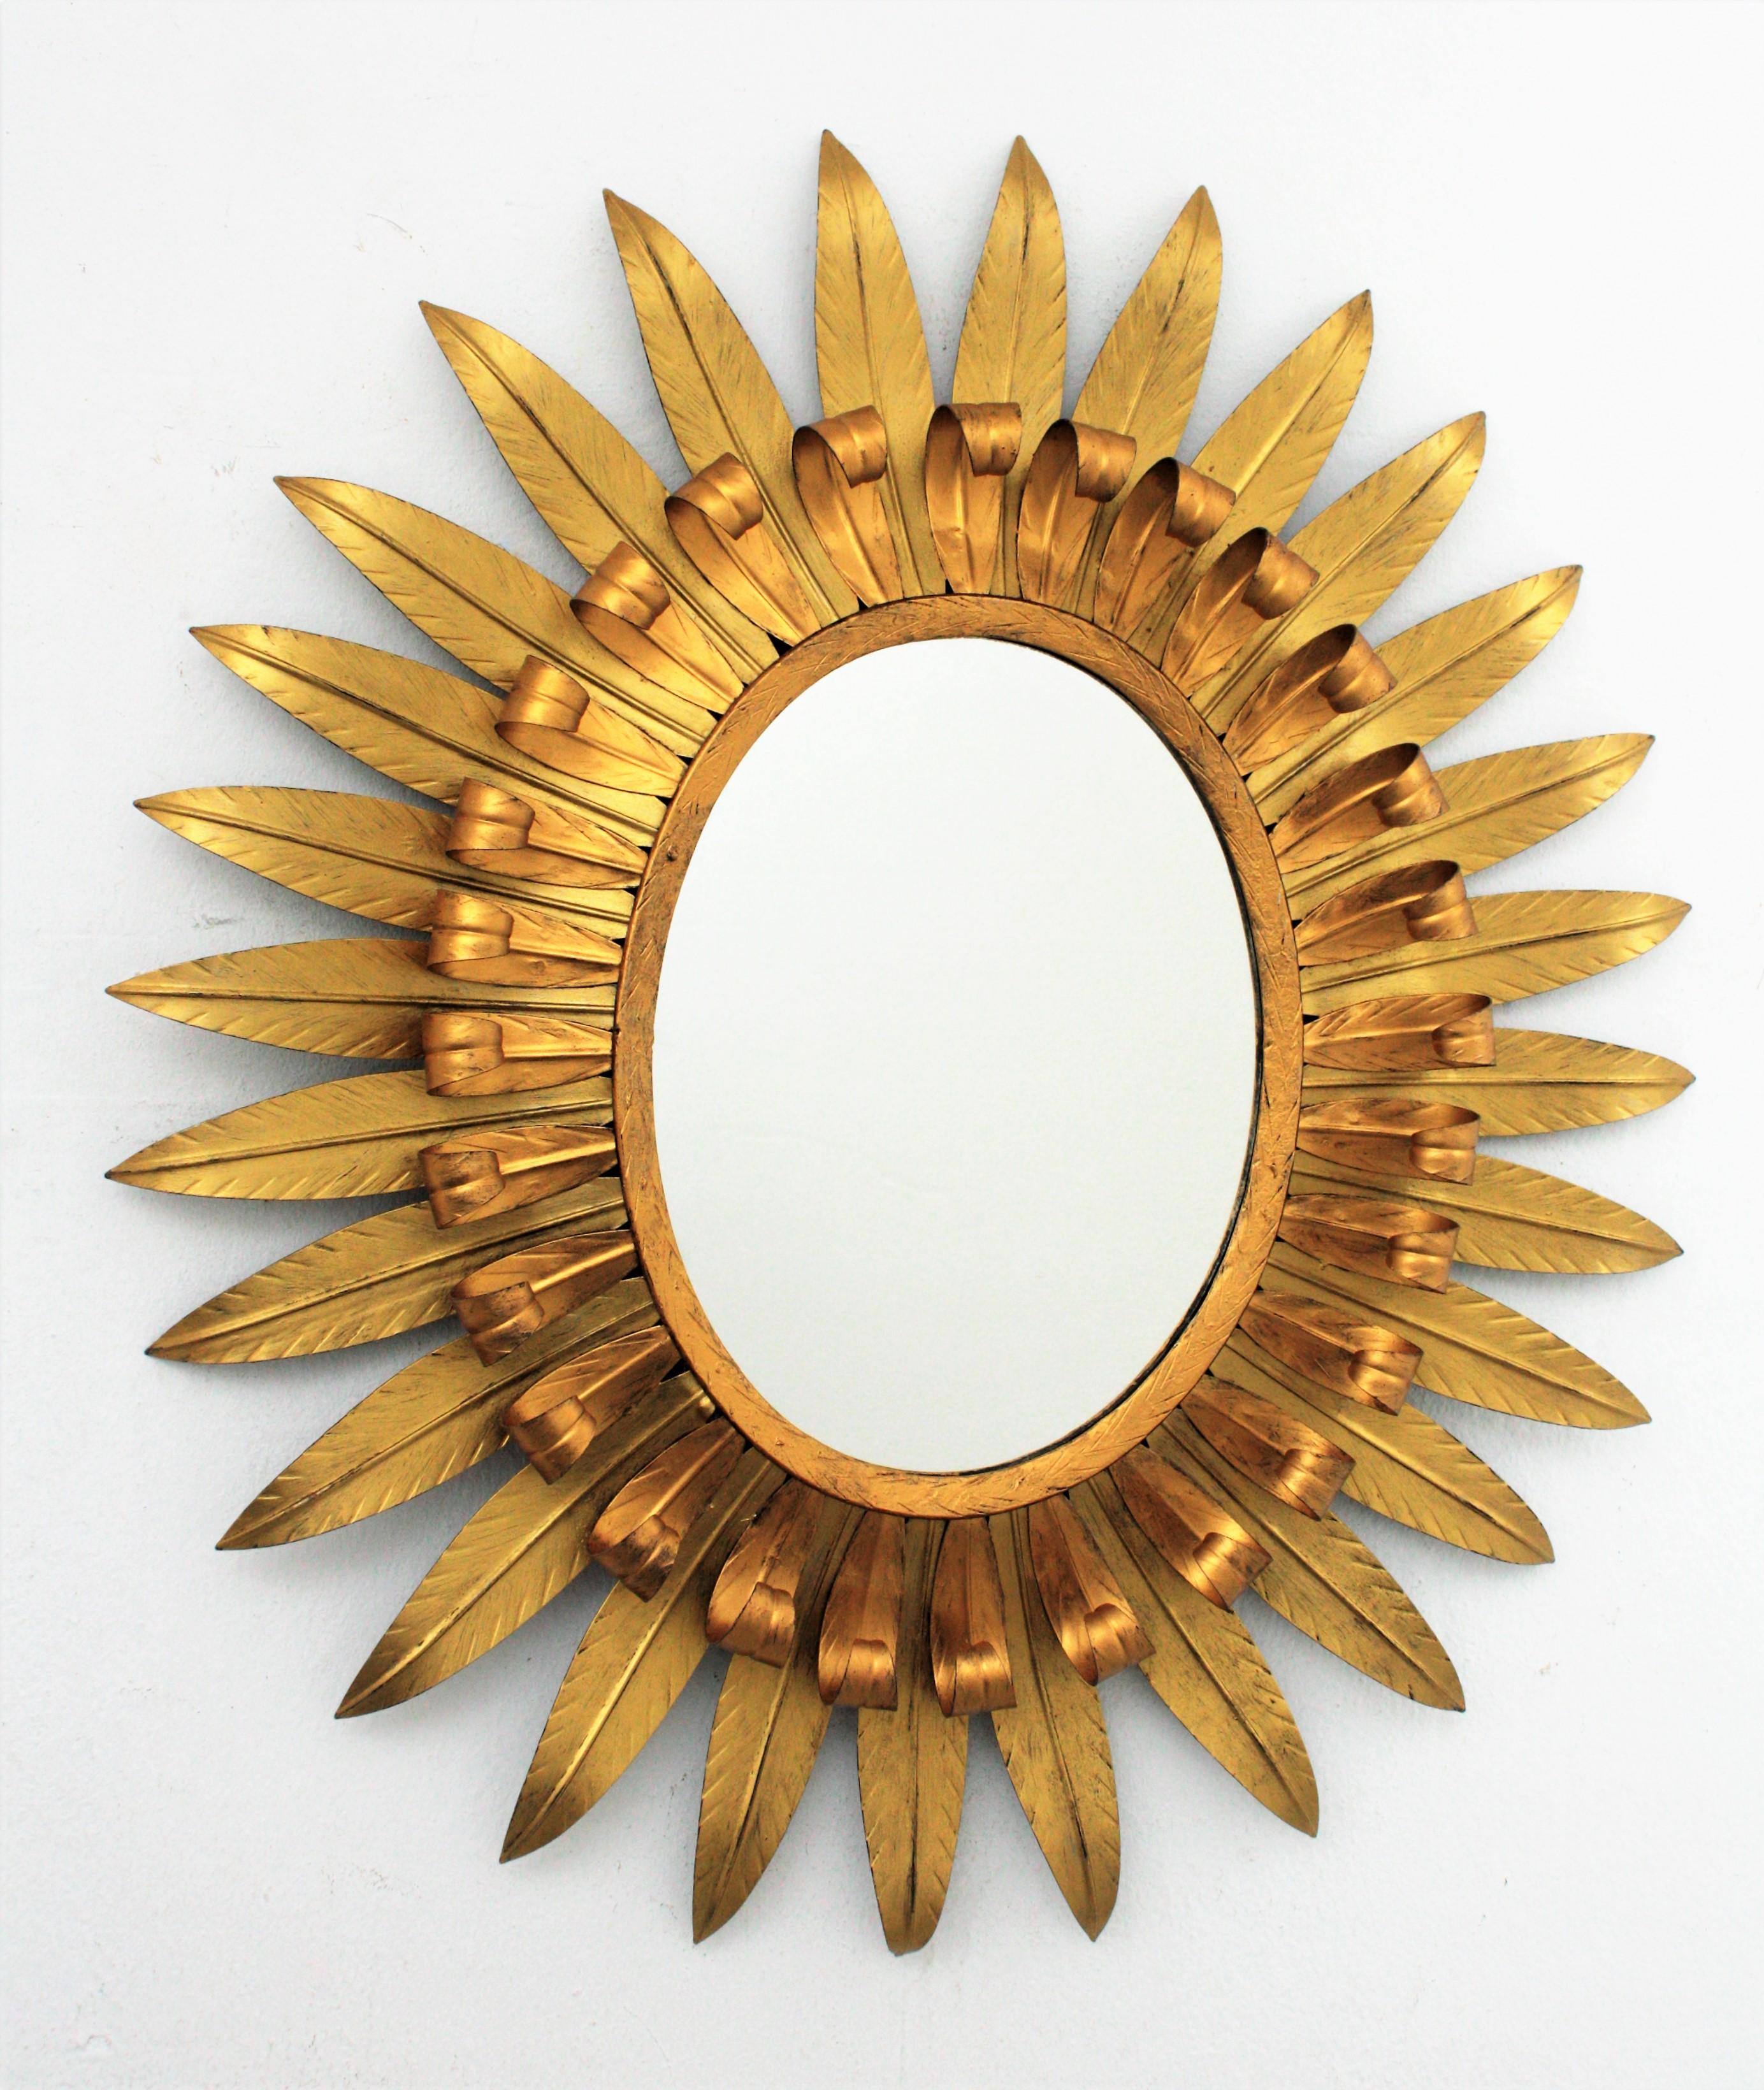 Spanish gilt iron Mid-Century Modern eyelash oval sunburst mirror with gilt patina in two golden tones. Spain, 1960s. 
This mirror has two layers of beams, one of them with eyelash shape. The bicolor tones highlight the beauty of this sunburst